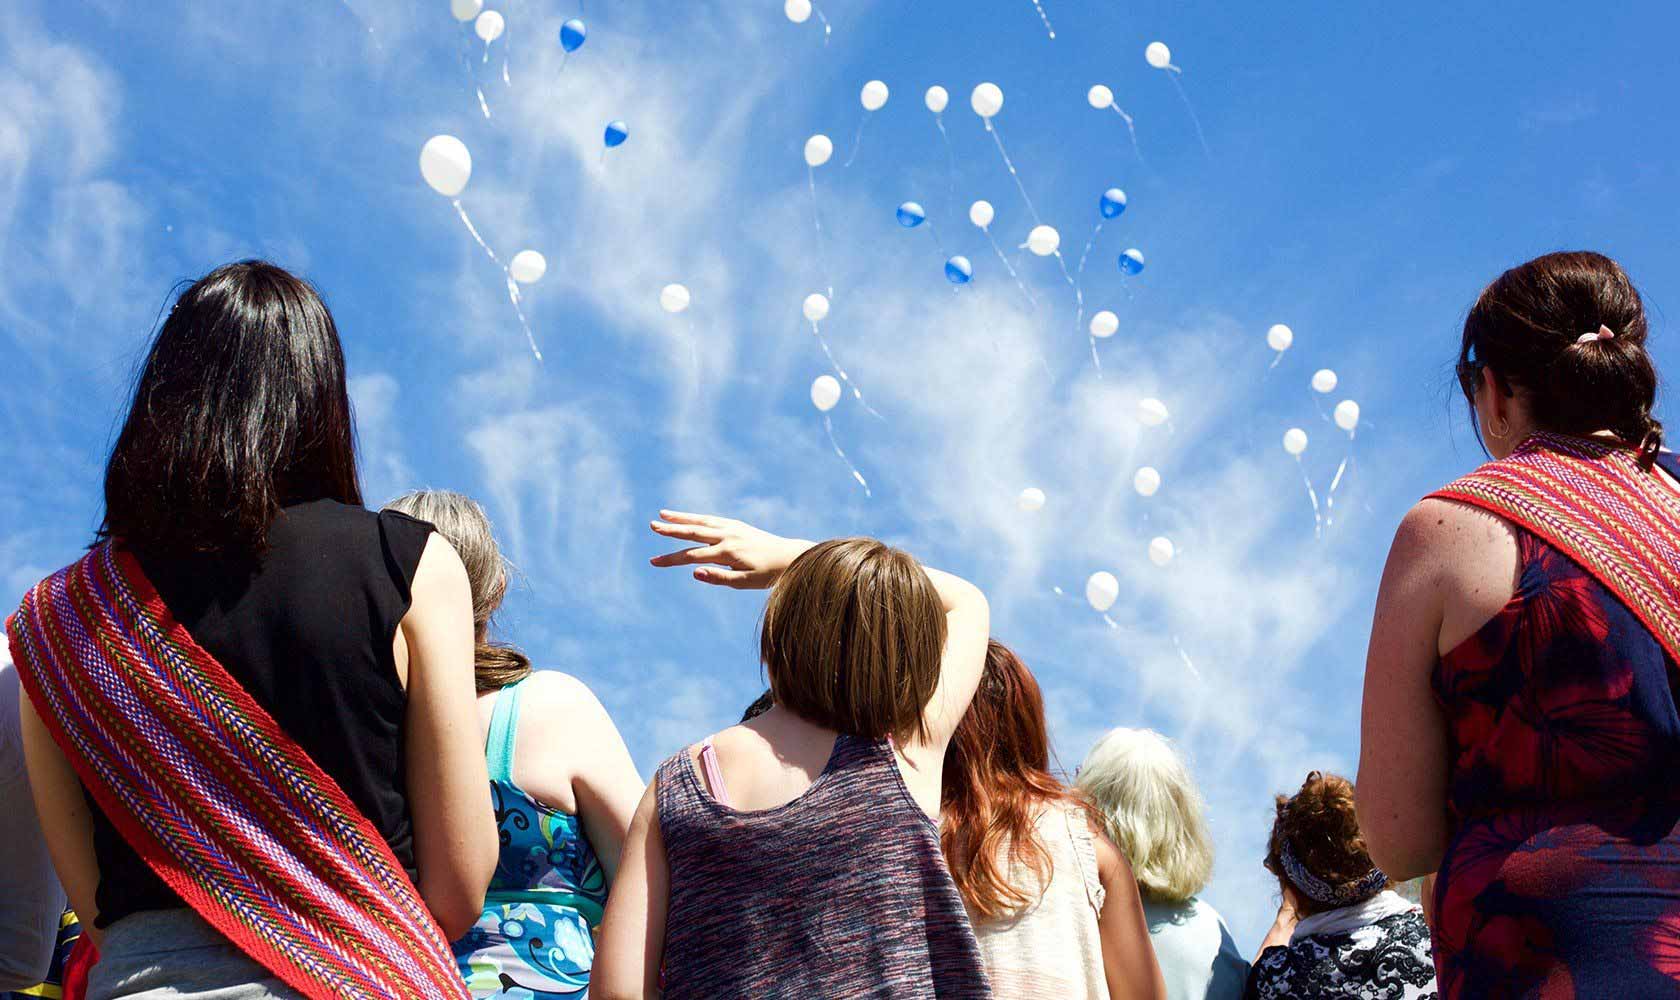 A group of youth releasing balloons into the sky.